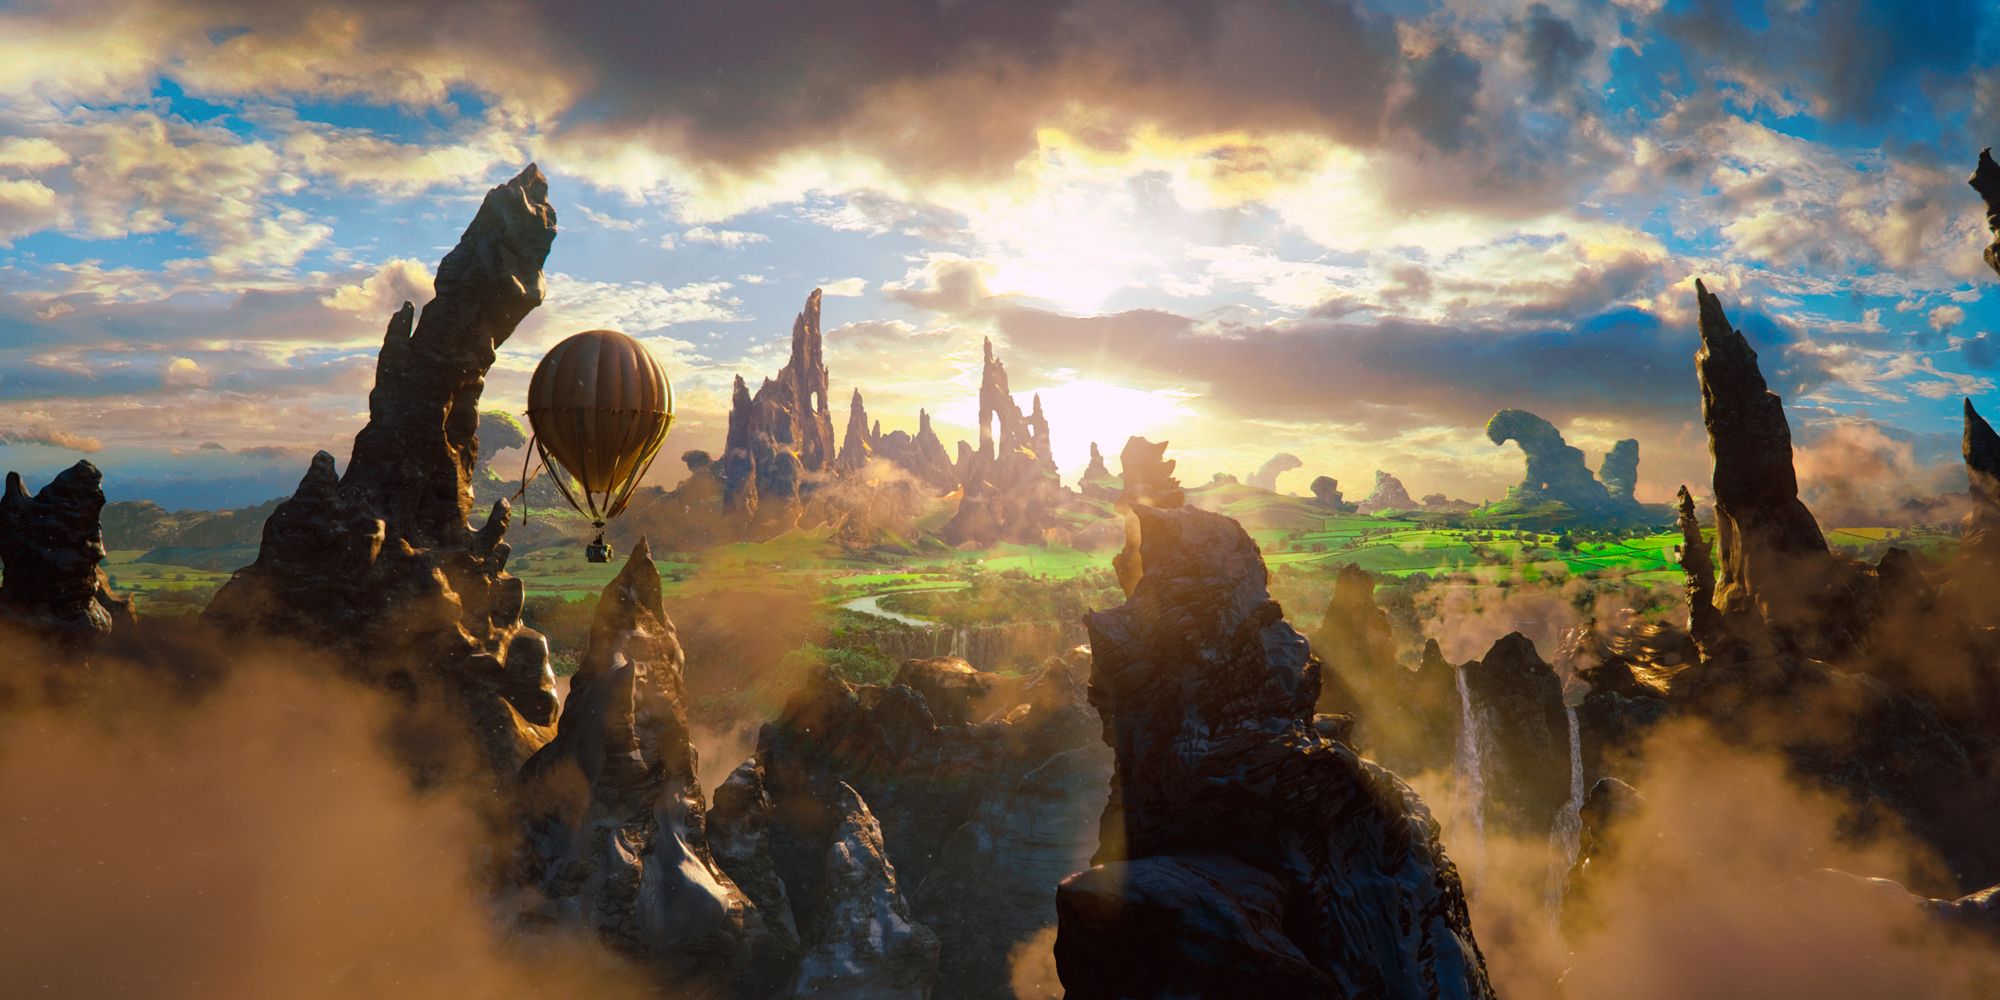 The Wonderful World of Oz the Great and Powerful